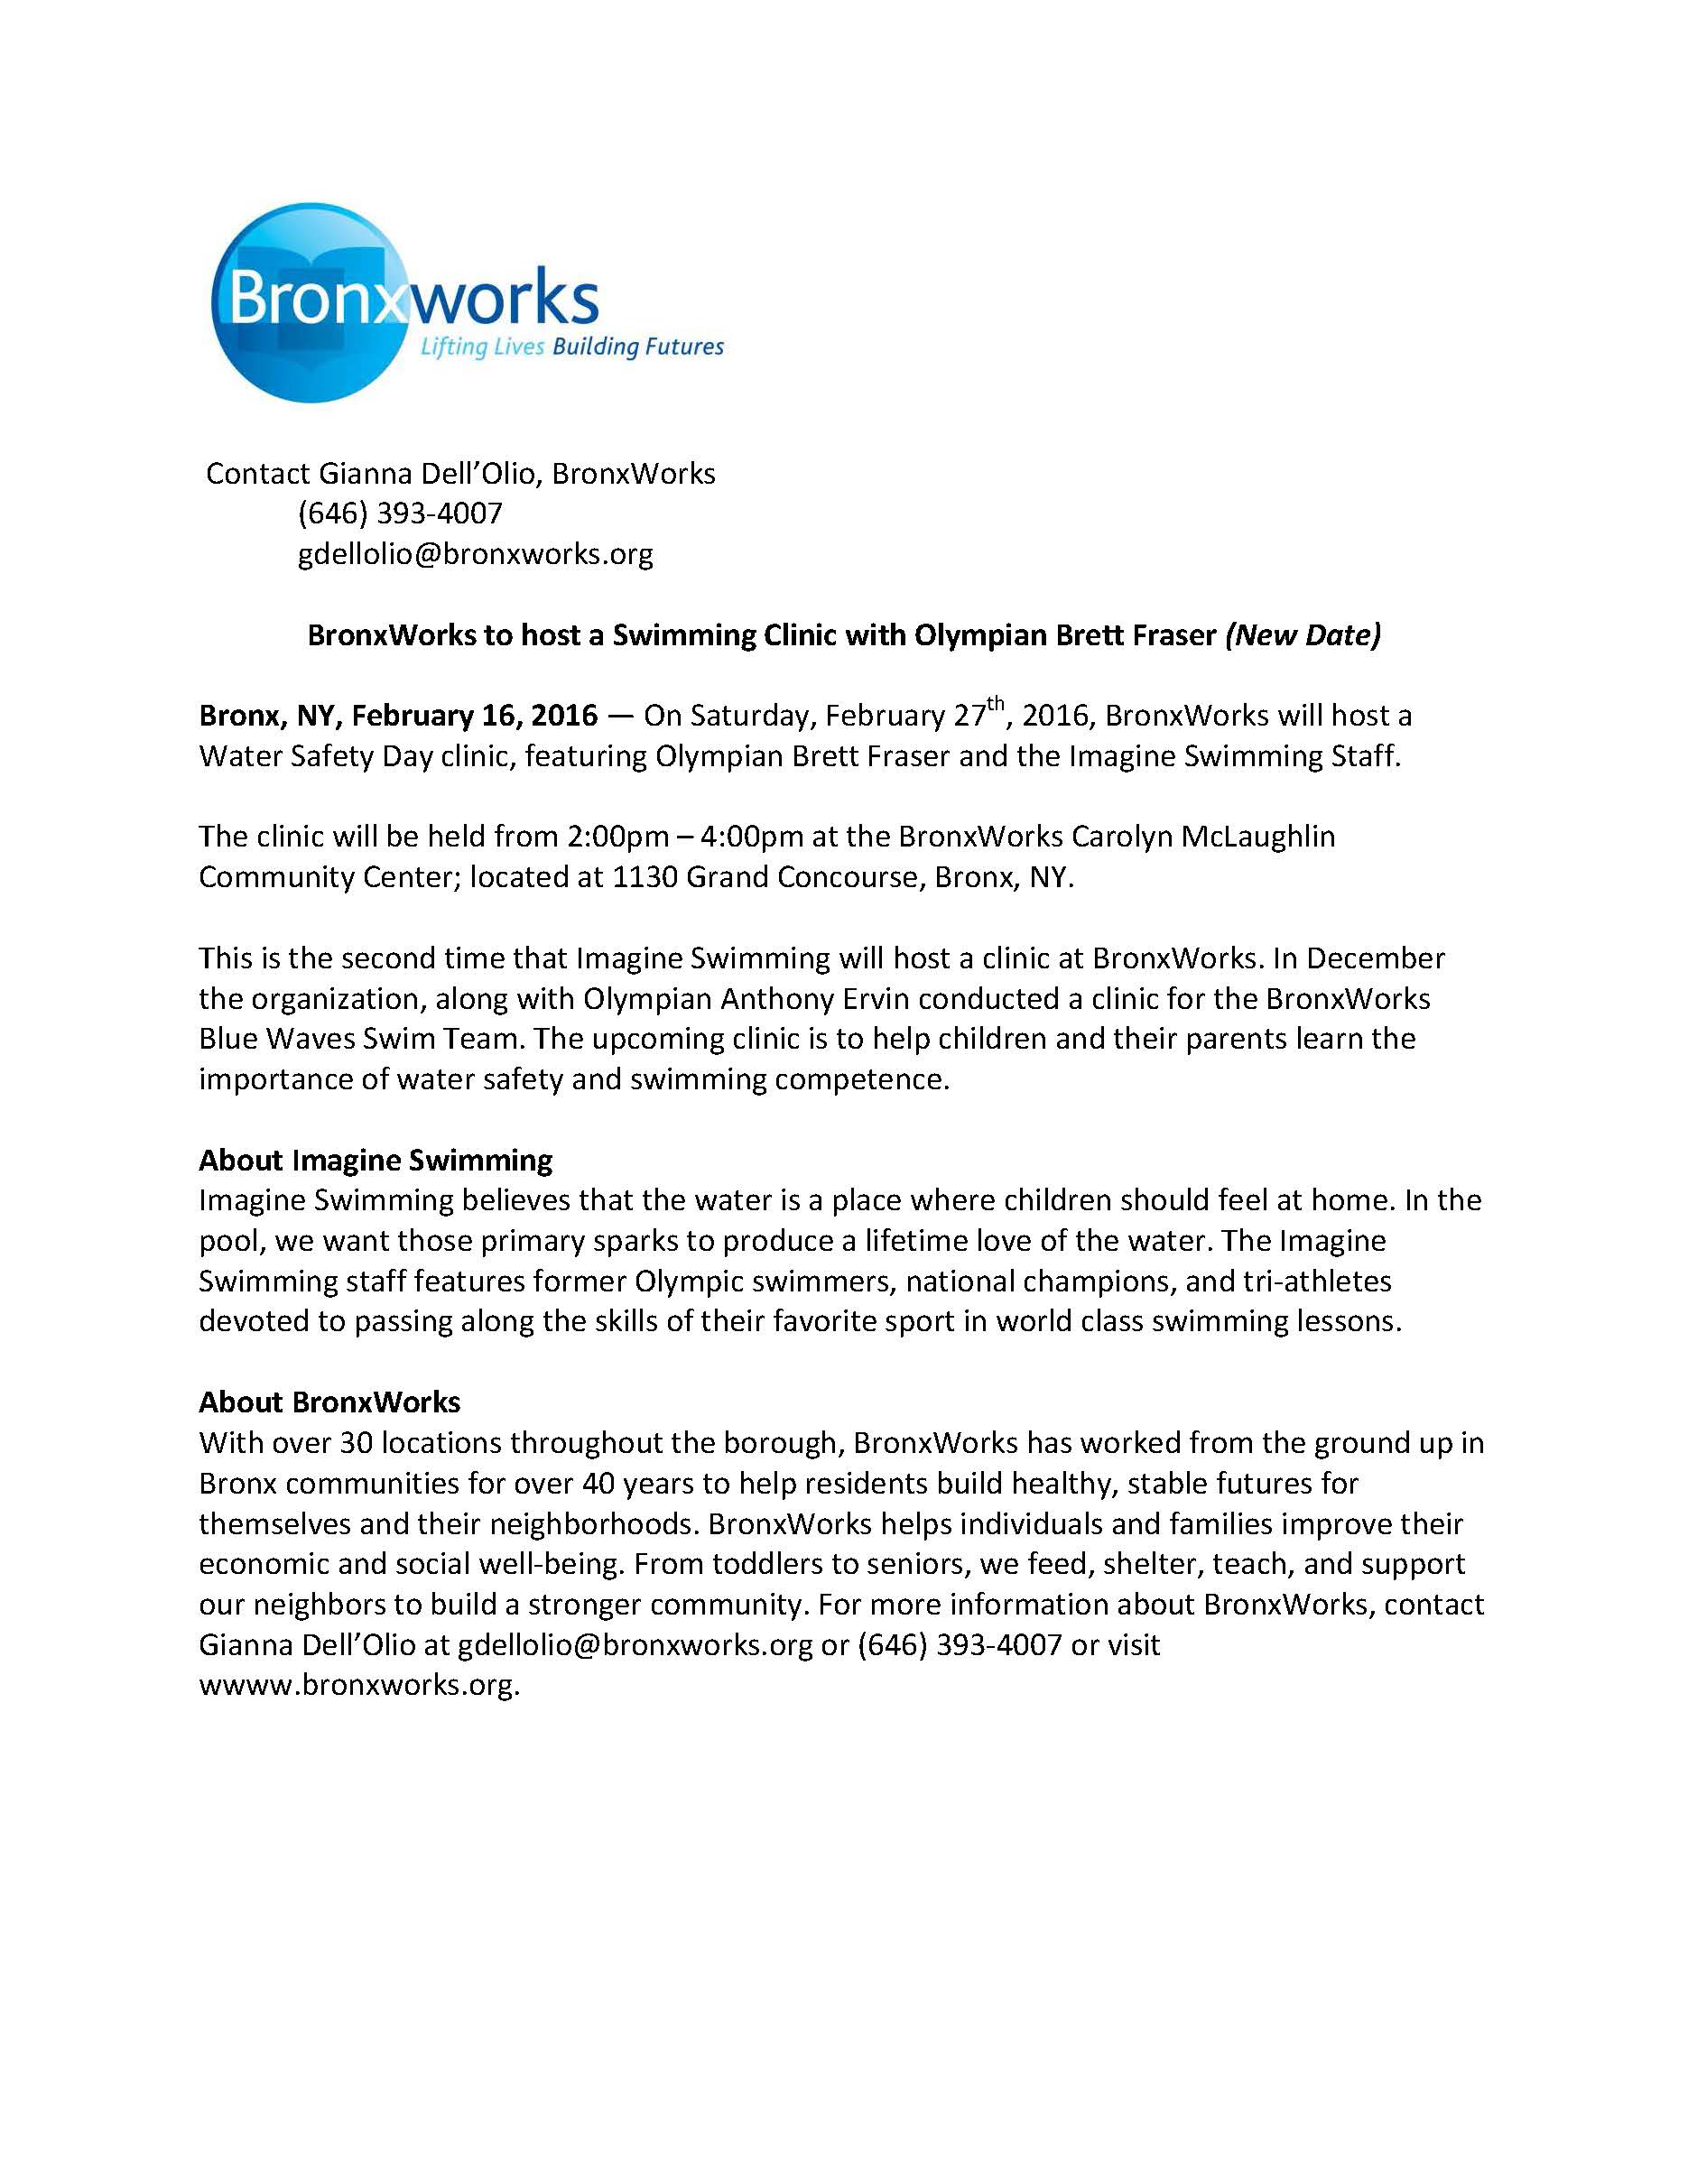 BronxWorks Hosts a Swimming Clinic with Olympian Brett Fraser PRESS RELEASE